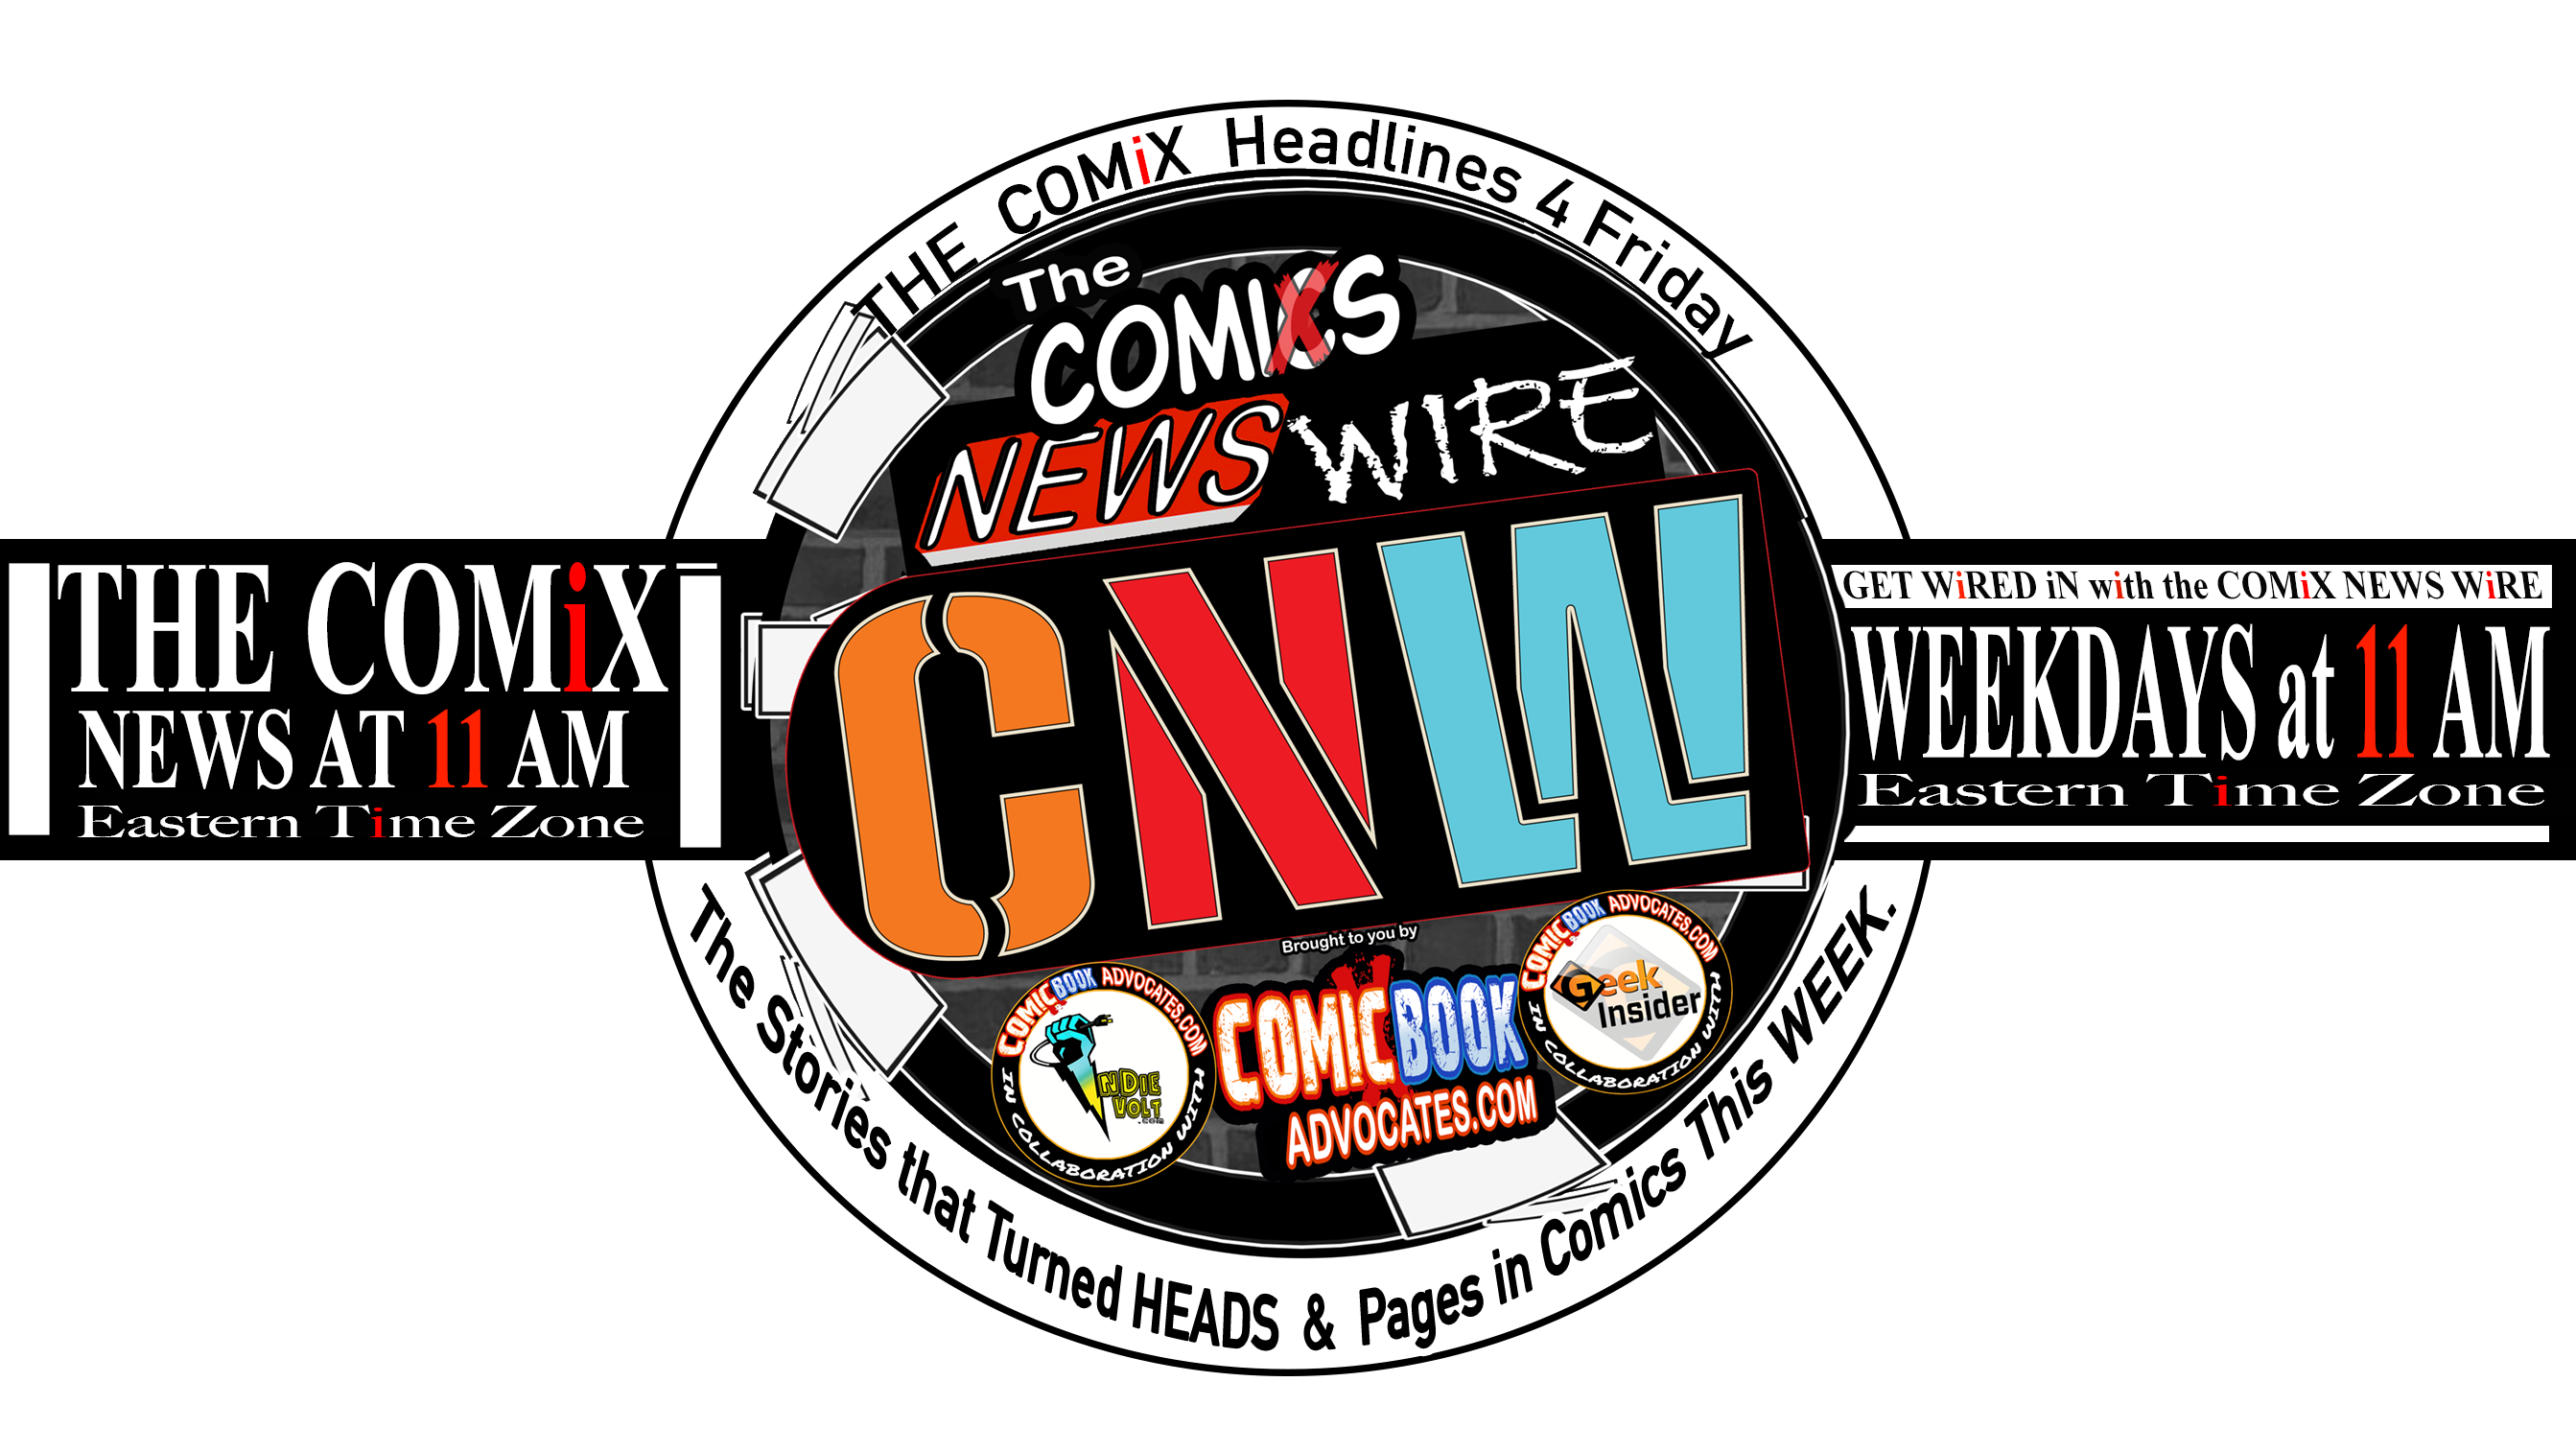 FRIDAY’s RUNDOWN for CNW NEWS AT 11 am ET – Lets END STRONG with some CREATIVE NEWS 10.09.20